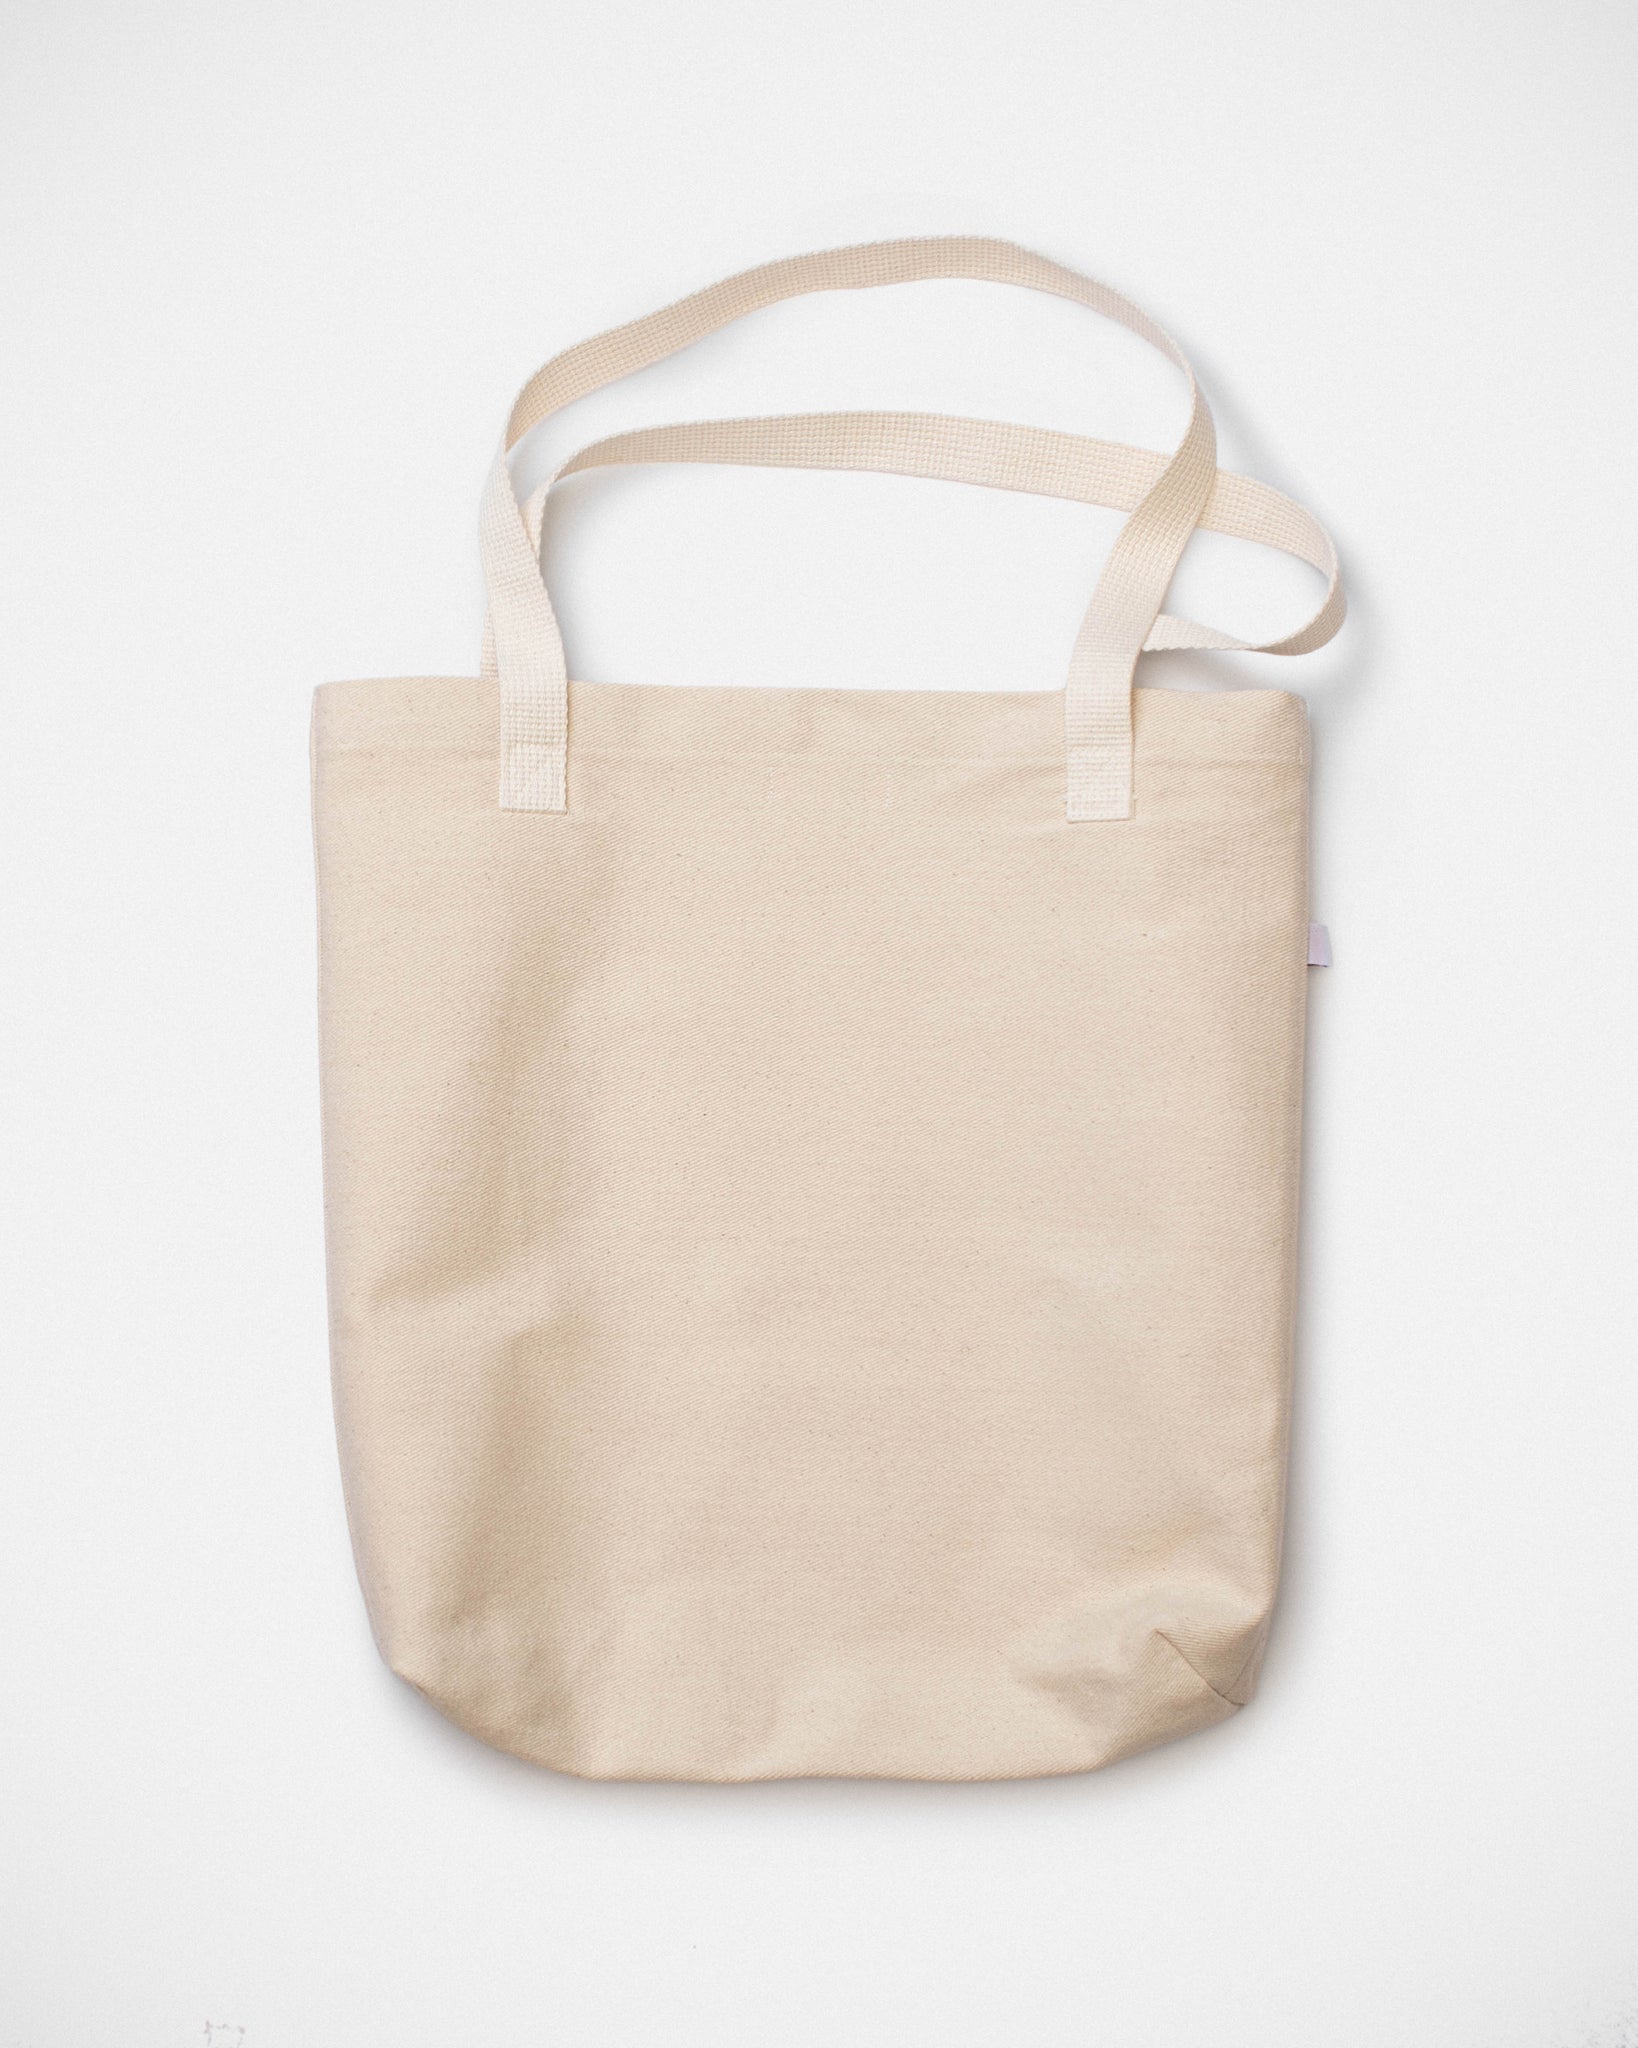 My Pace Tote Bag - Natural White